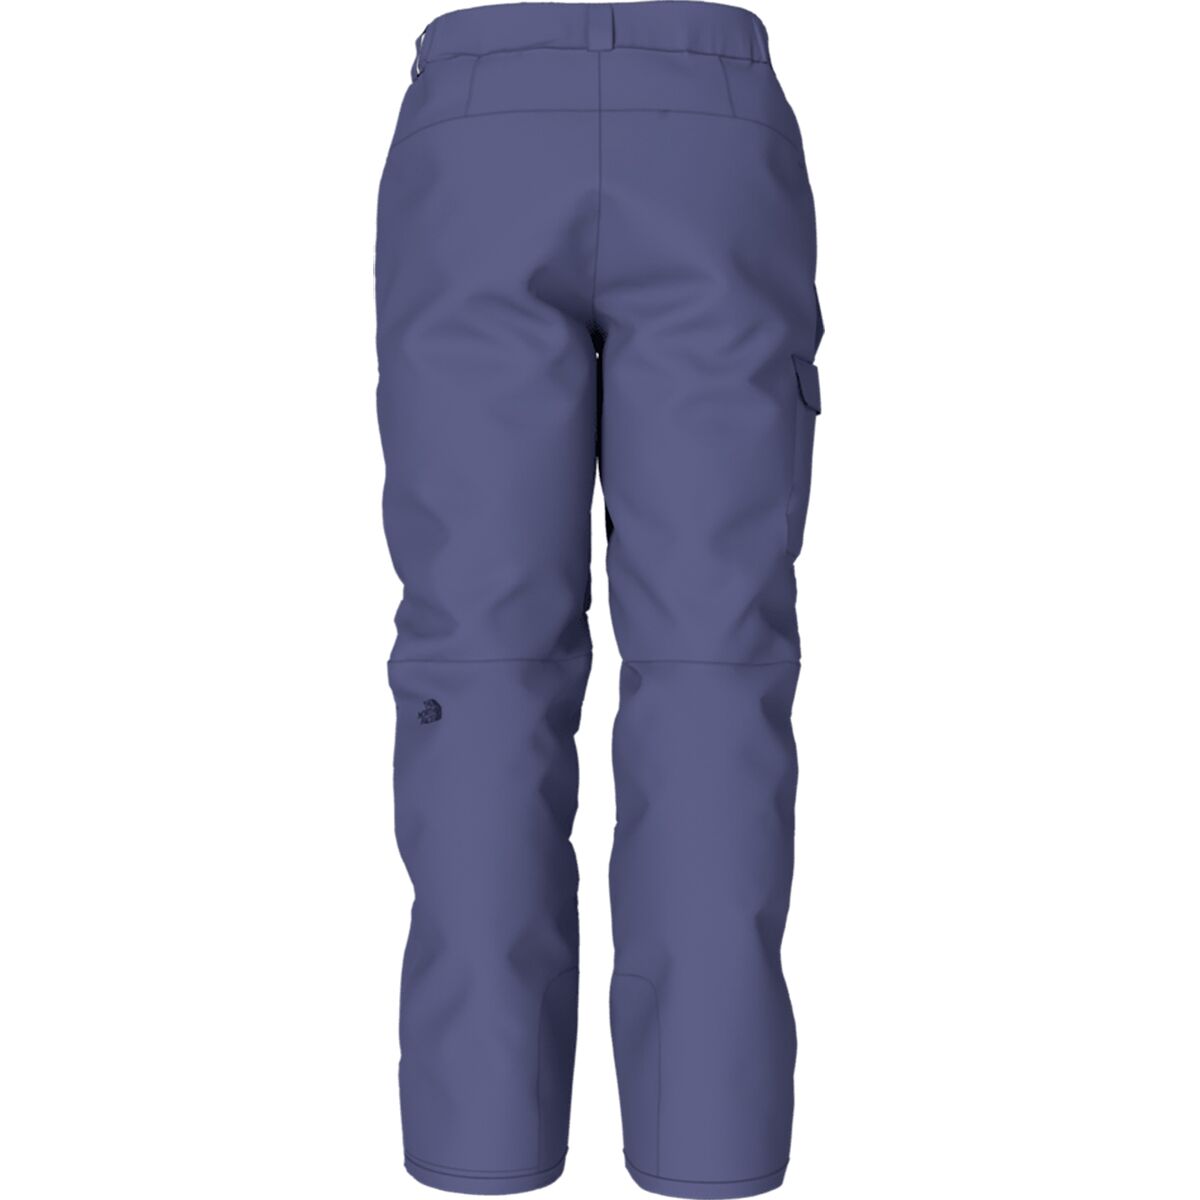 Mens The North Face Freedom Ski Snowboard Shell Waterproof Snow Pants Harbr  Blue